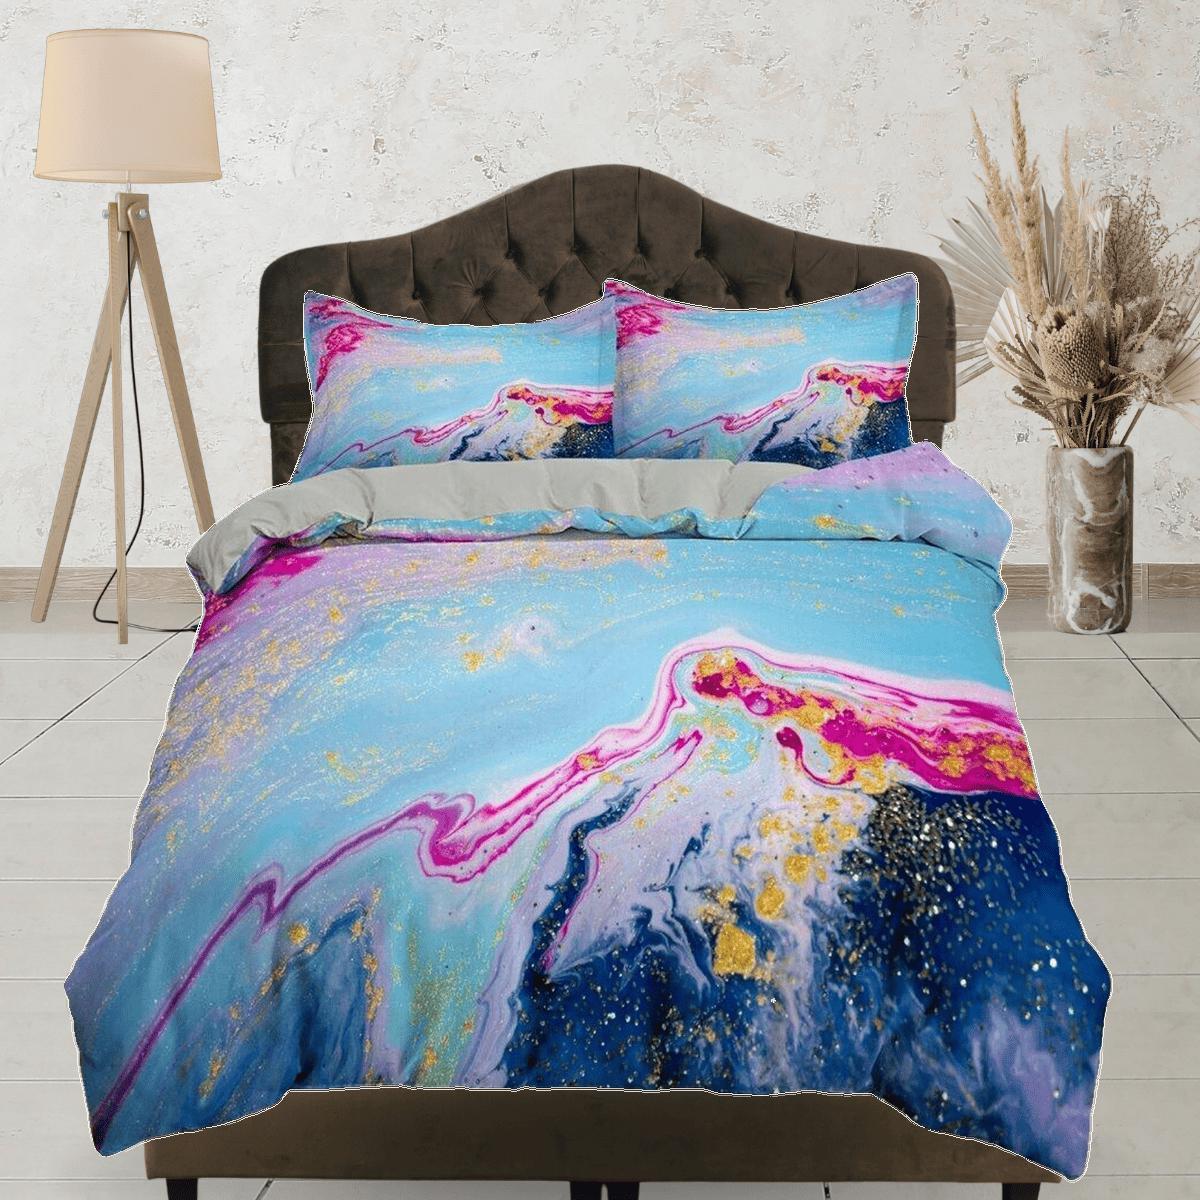 daintyduvet Blue and pink contemporary bedroom set aesthetic duvet cover, alcohol ink abstract art room decor boho chic bedding set full king queen